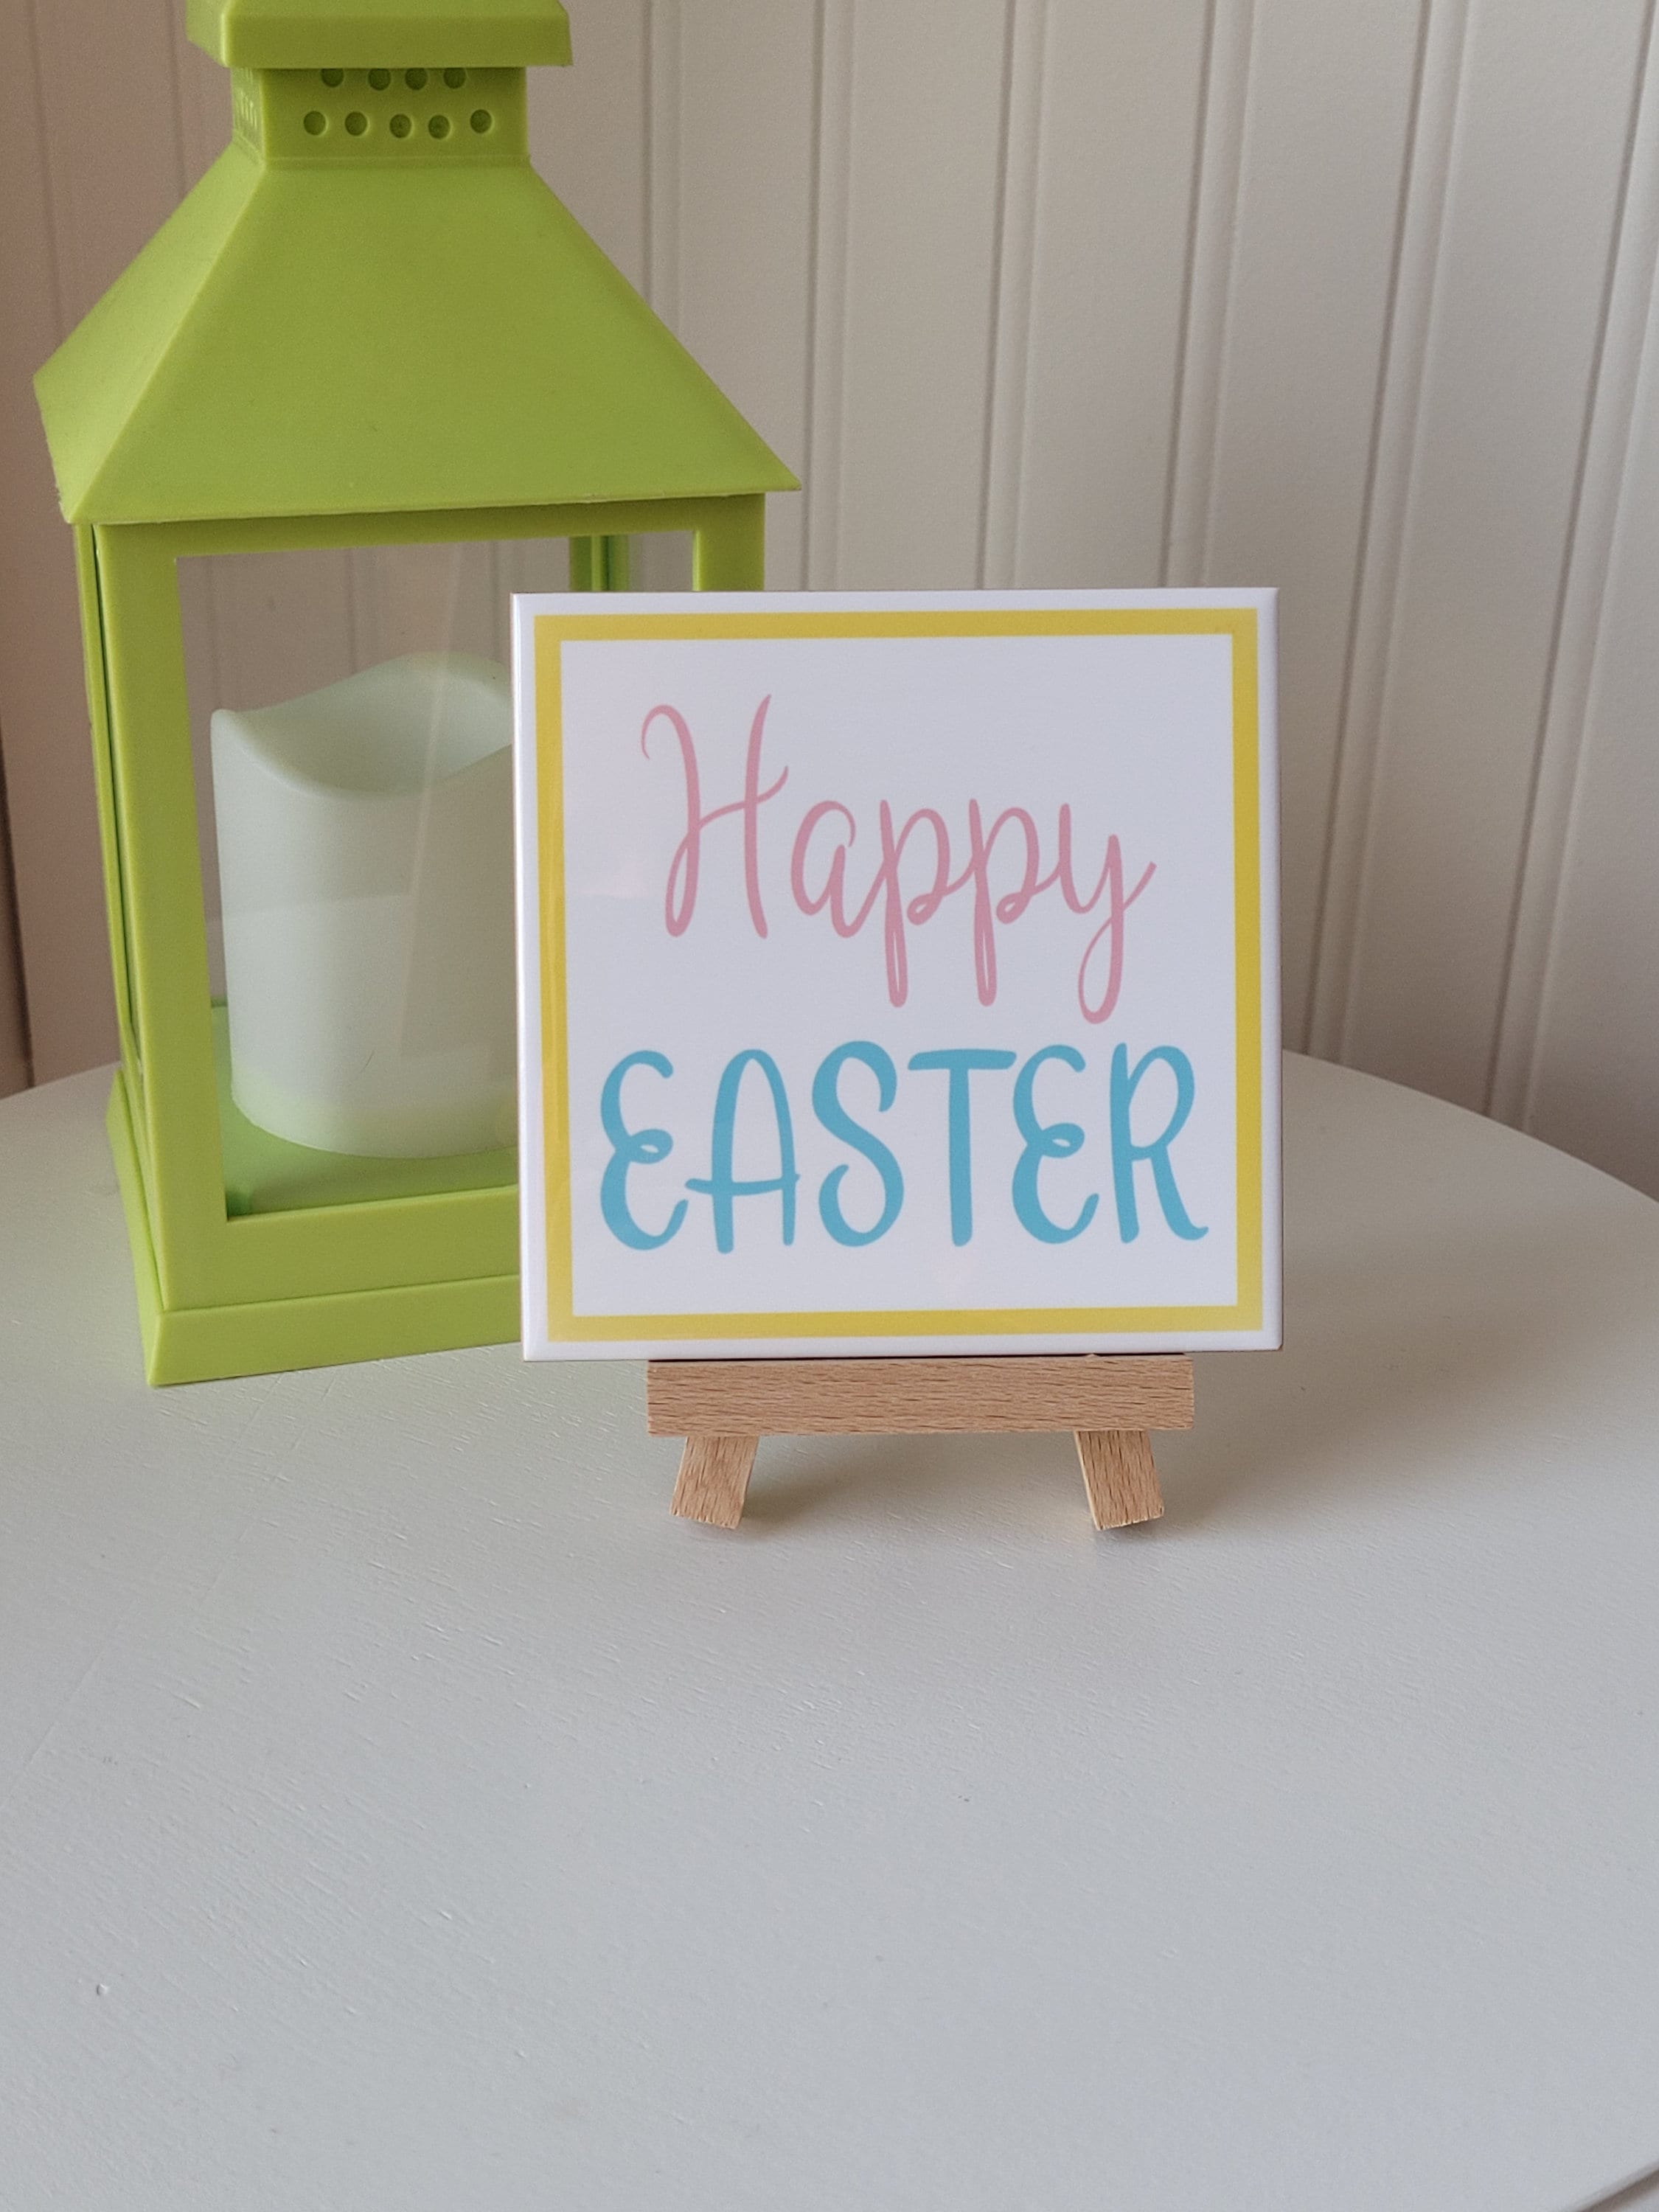 Happy Easter Tile Wall Hanging Décor Sign 7.5"X19" w 